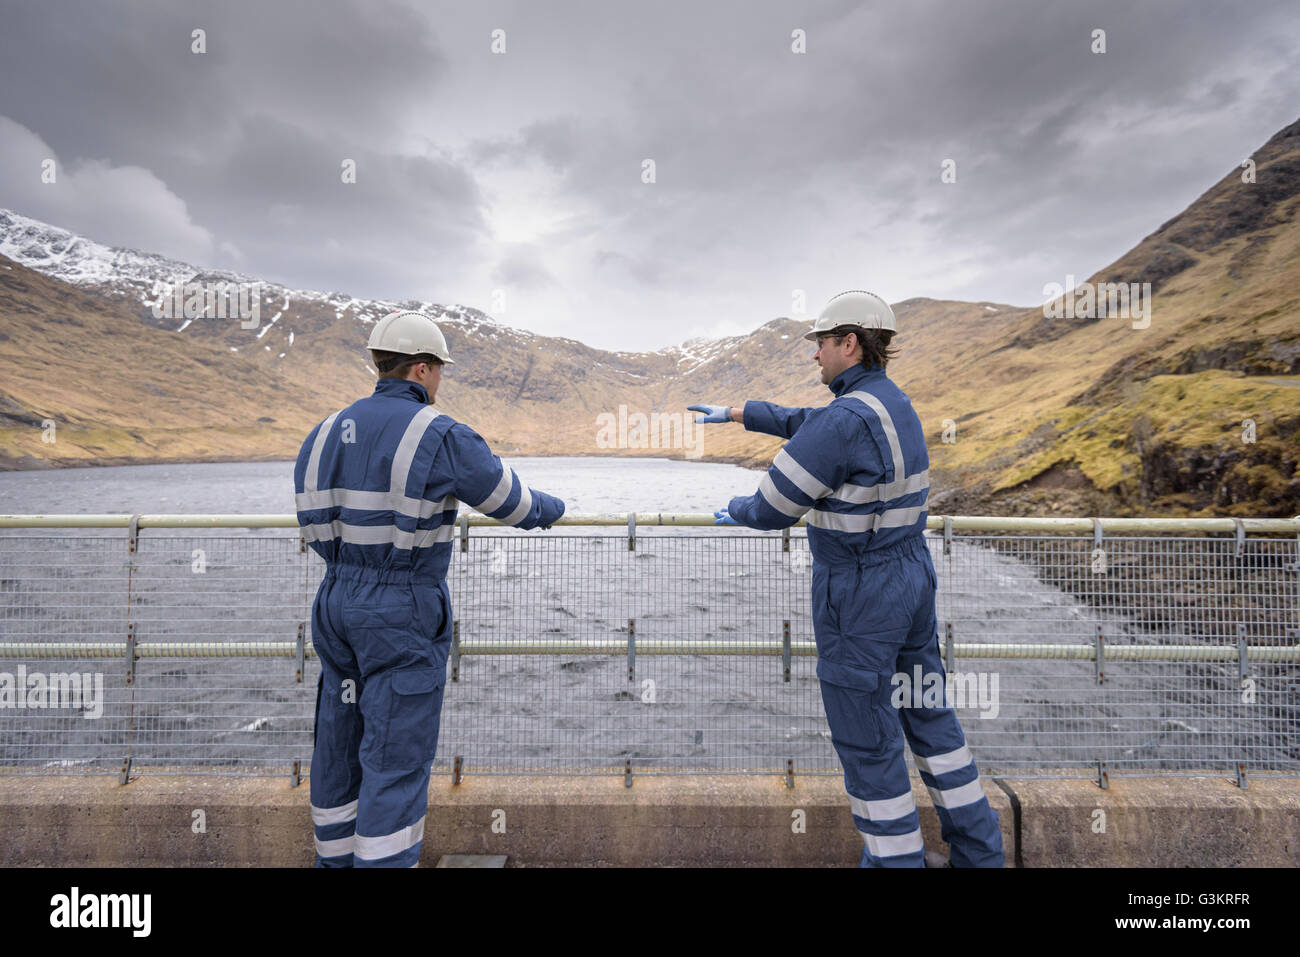 Workers on dam with water at hydroelectric power station Stock Photo